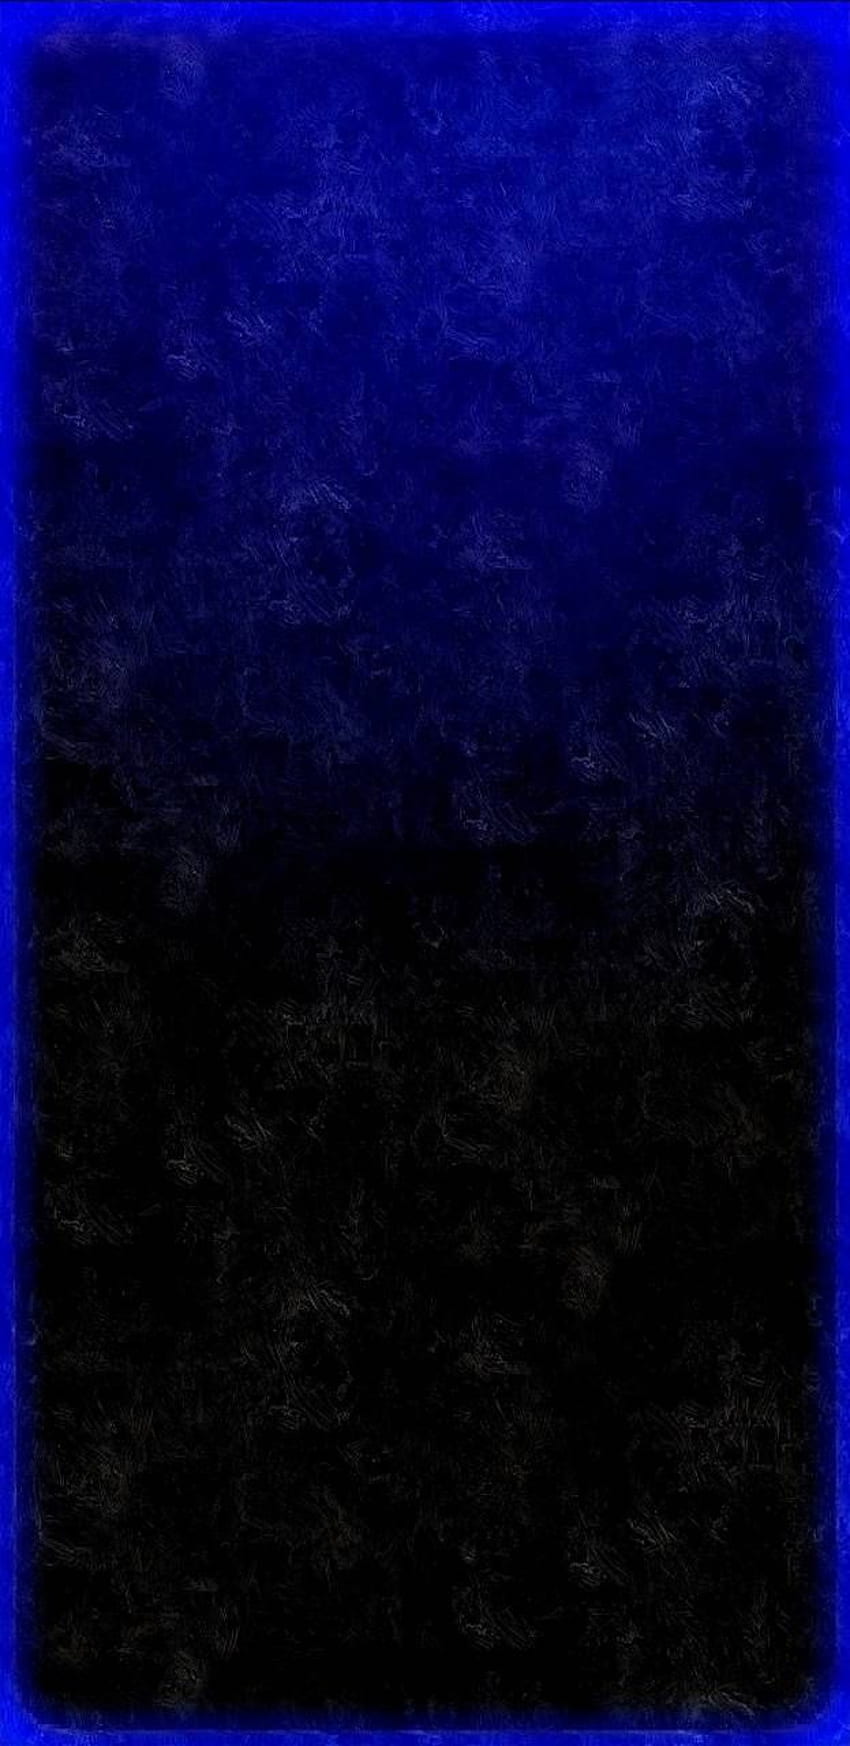 edge glow samsung by illigal2alien - 6c now. Browse million. Dark blue , Android blue, Blue phone HD phone wallpaper